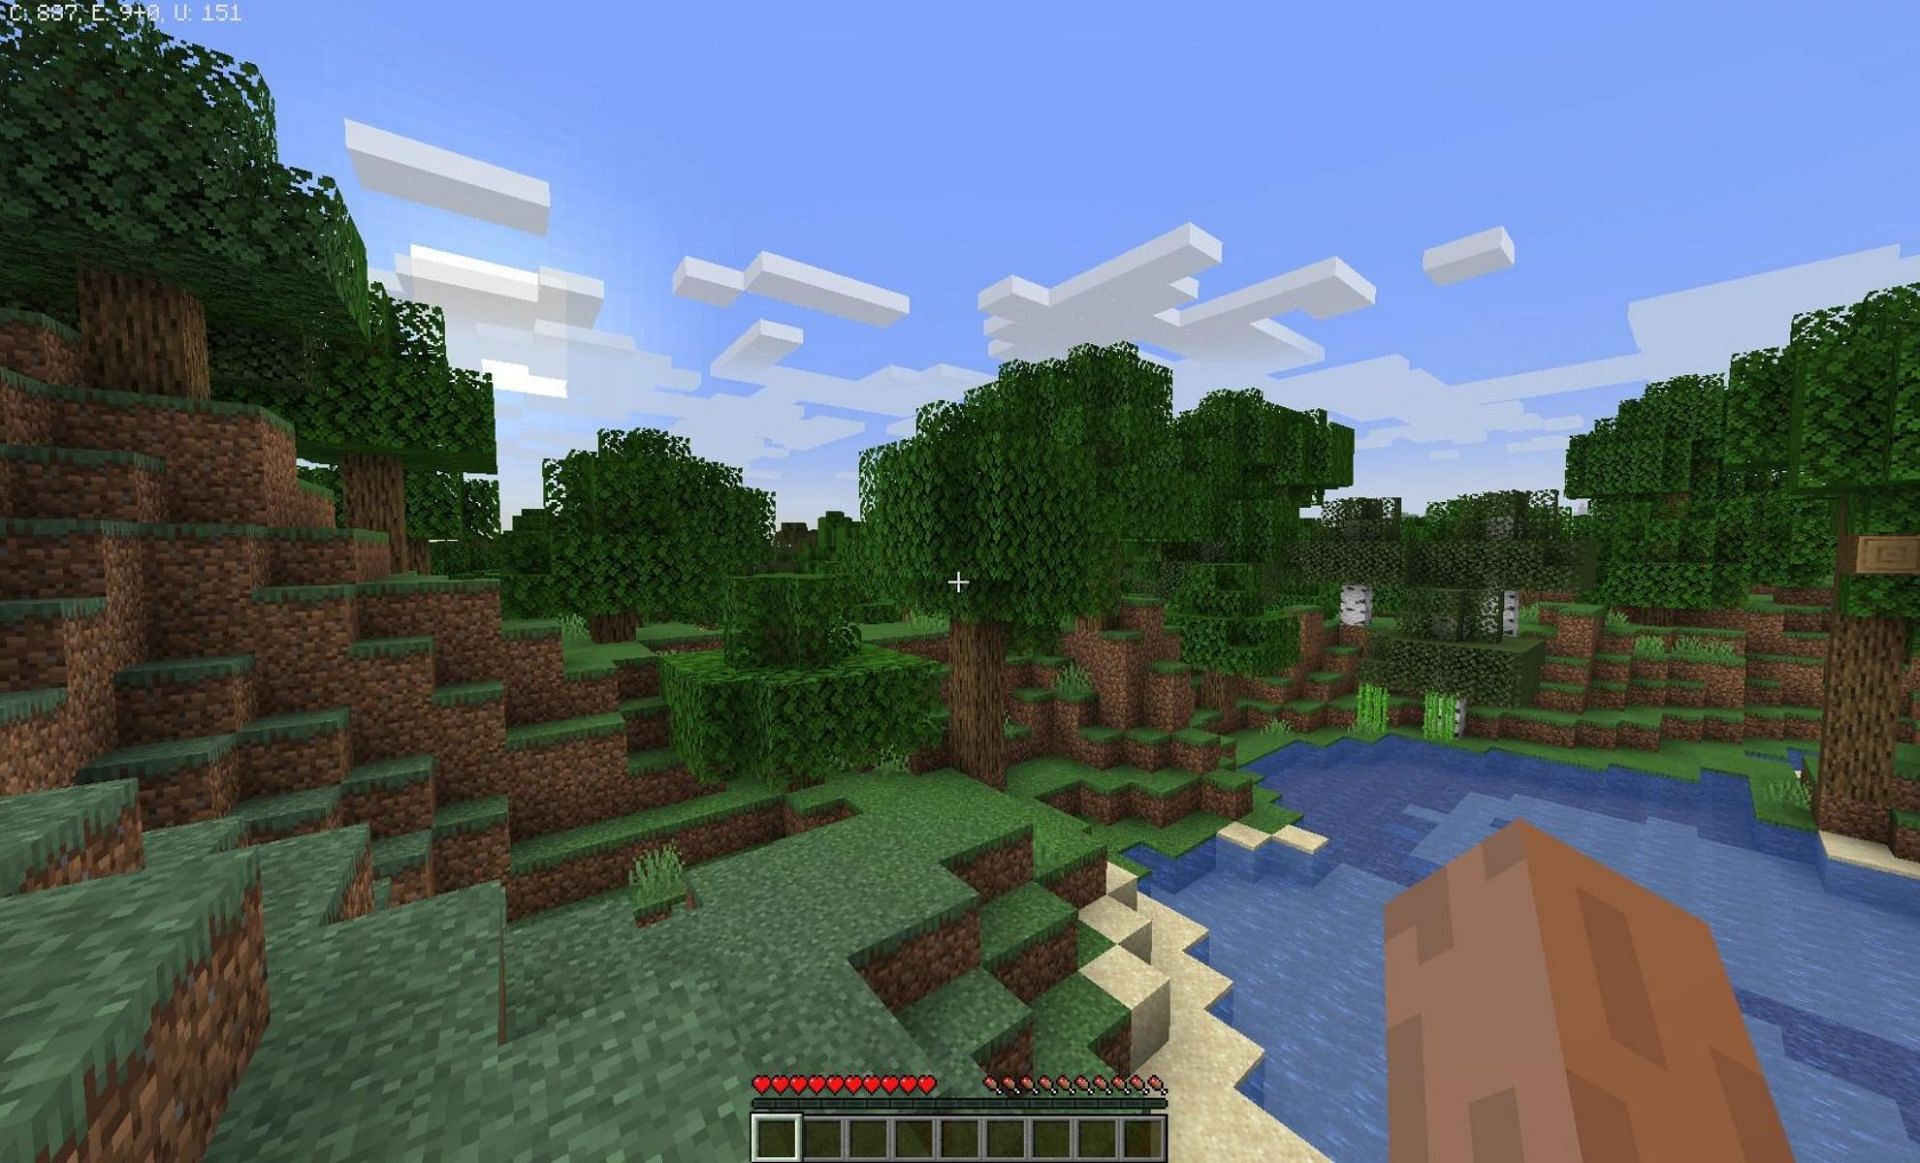 QuestCraft makes Minecraft: Java Edition playable on Quest 2